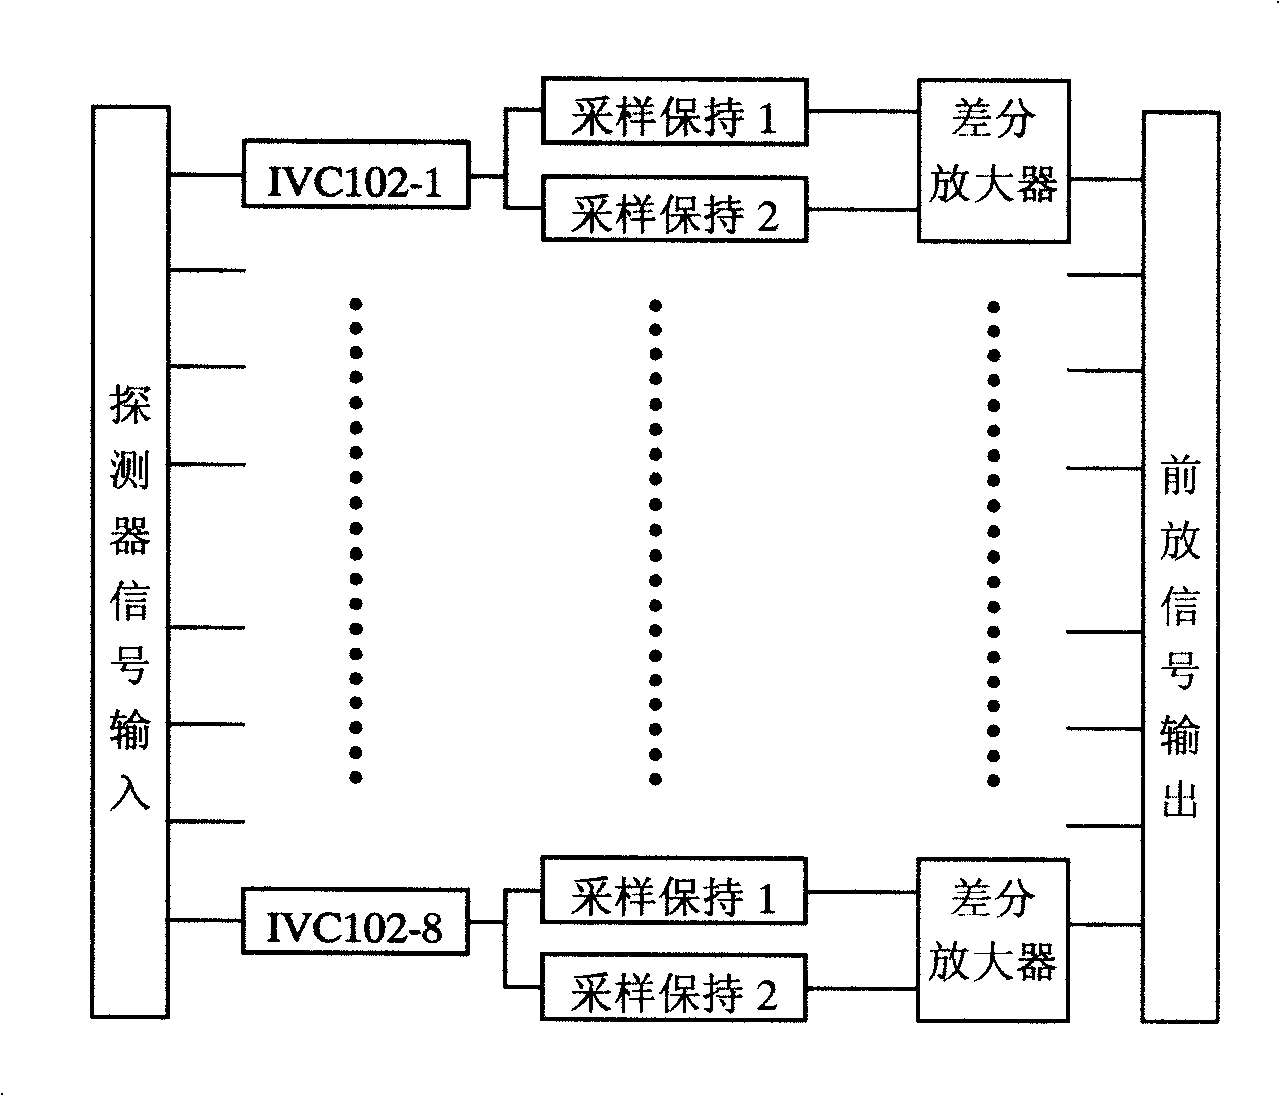 Radiation imaging collection device and radiation imaging data collection method